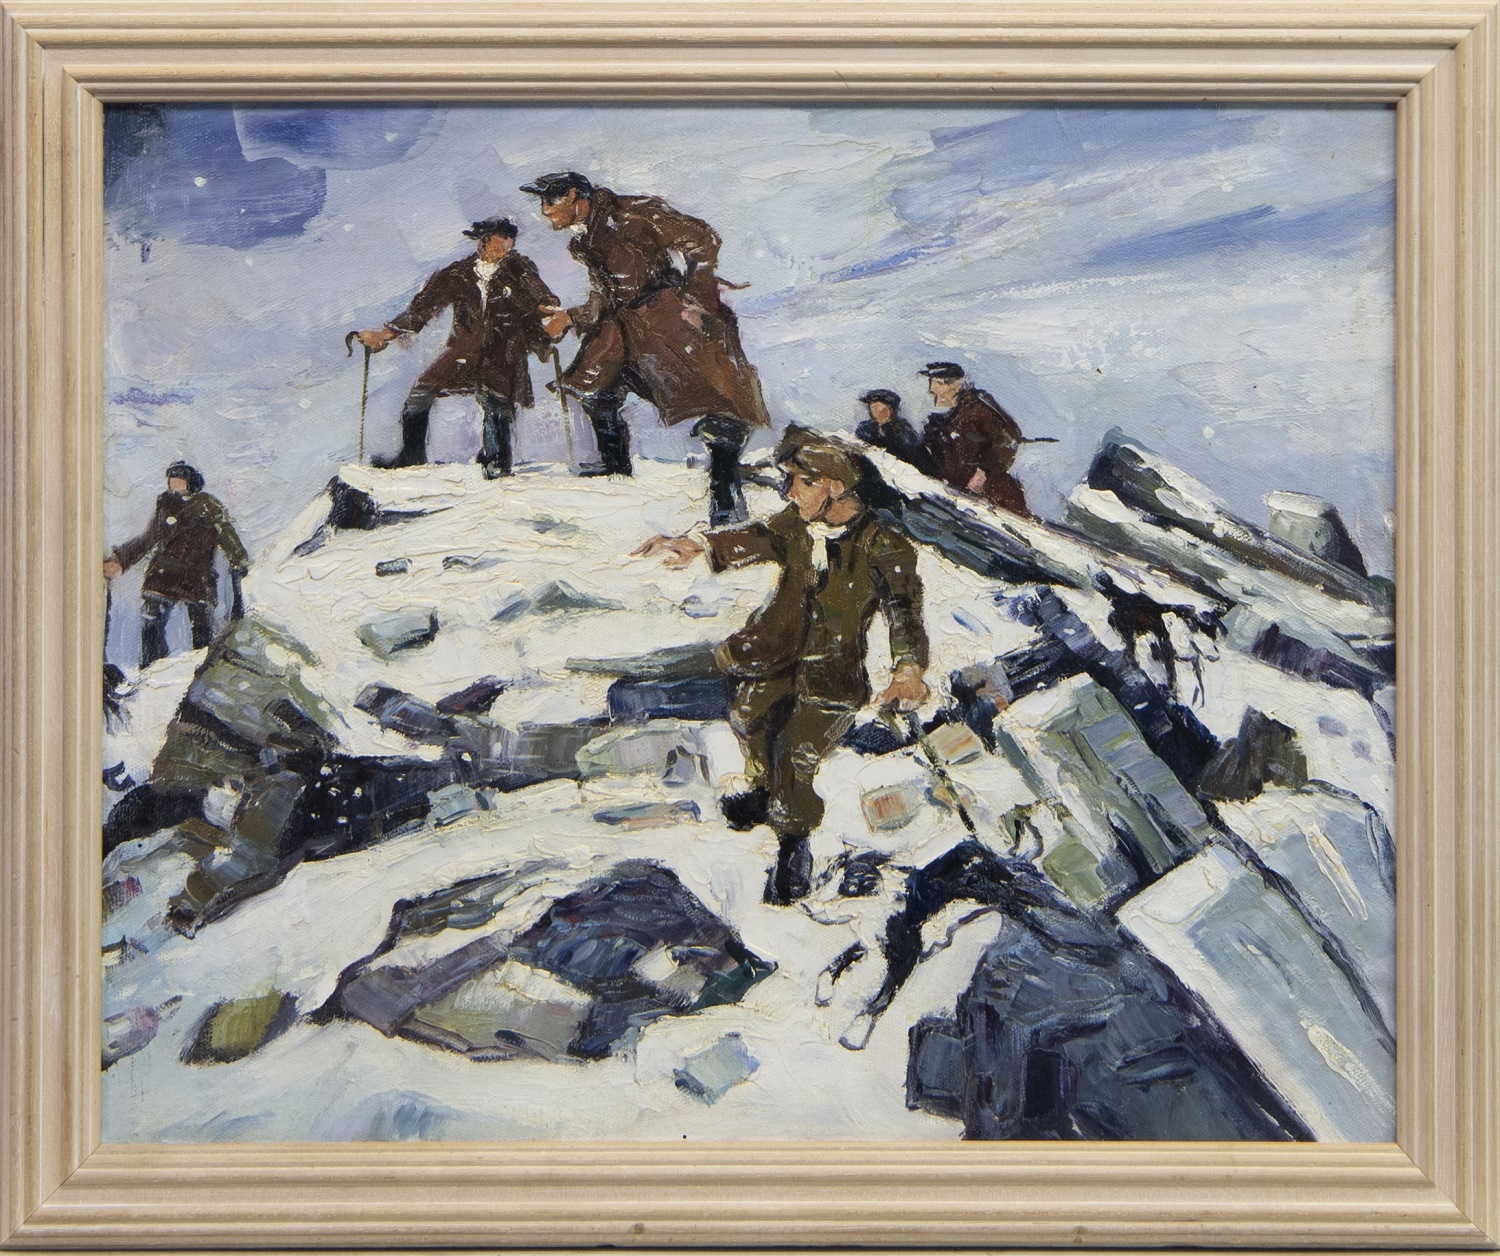 FARMERS AND THEIR DOGS ON A HILL IN WINTER, AN OIL, FOLLOWER OF SIR KYFFIN WILLIAMS